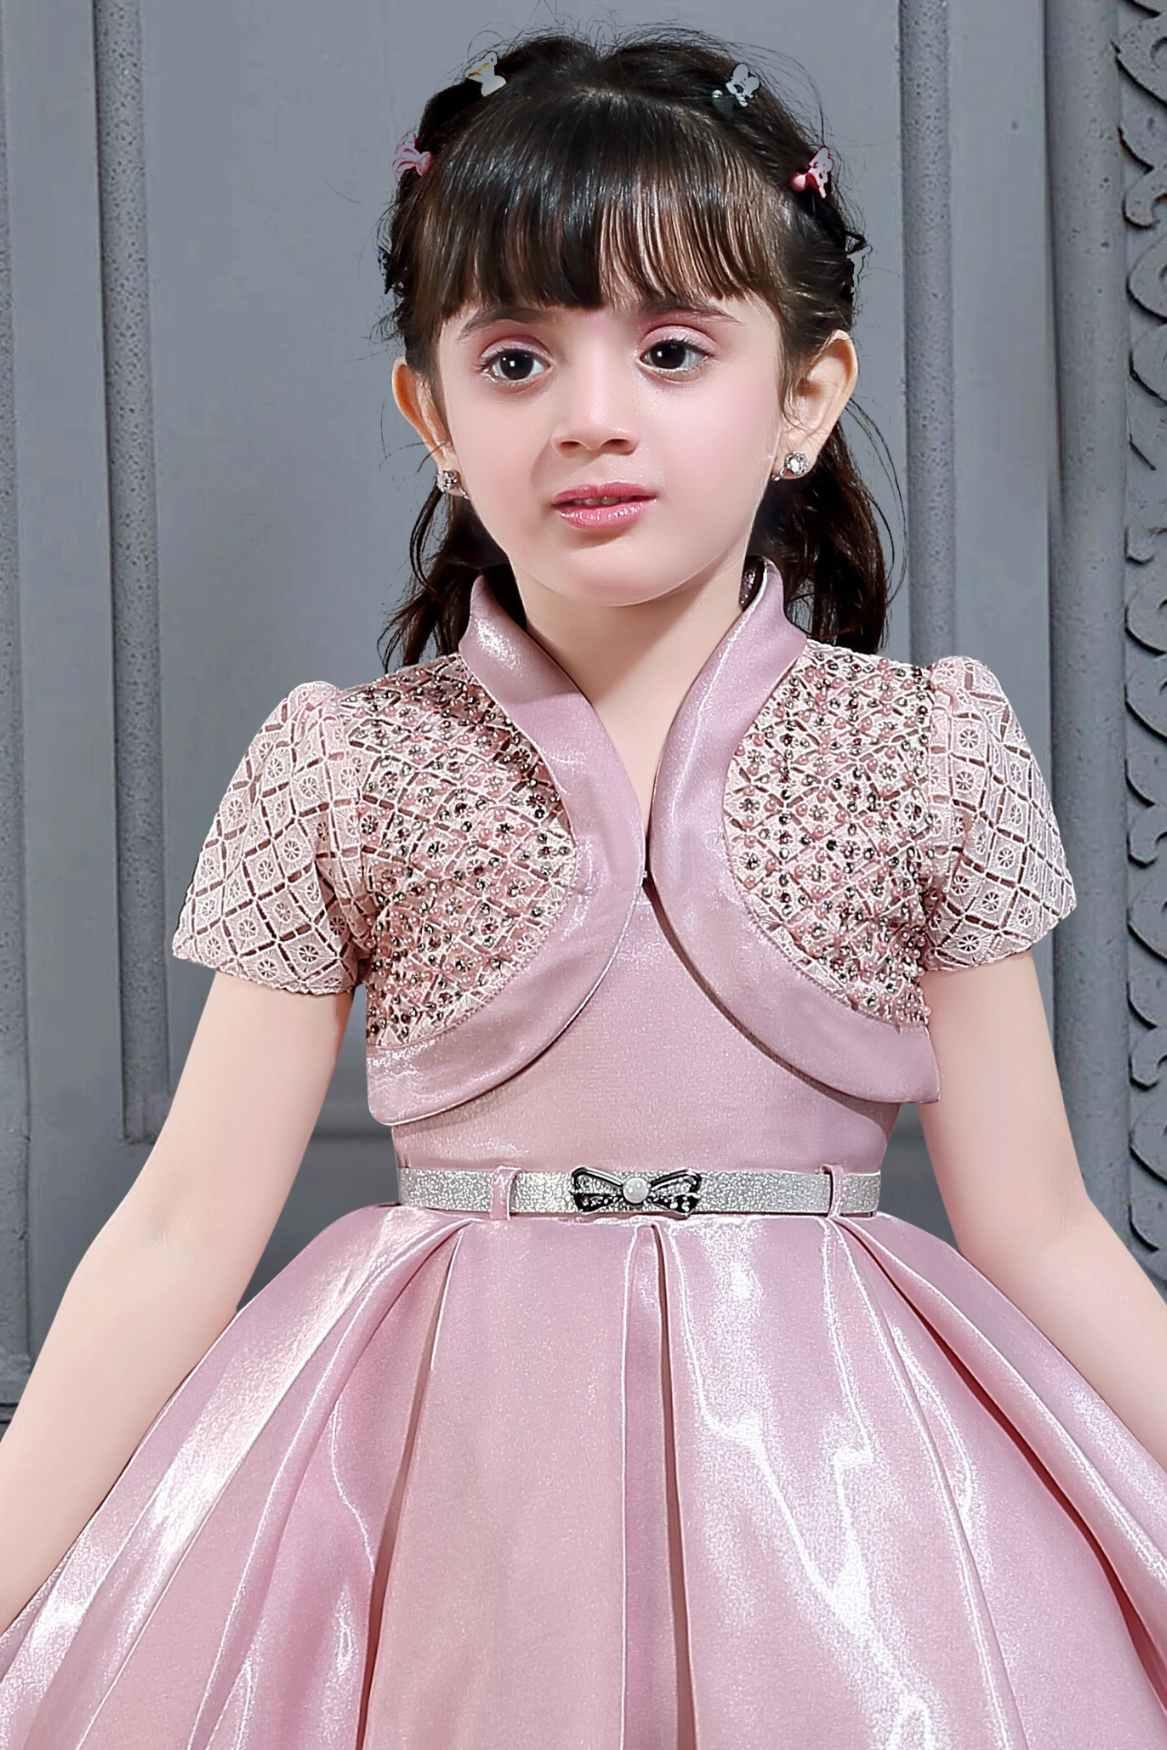 Elegant Peach Satin Party Frock With Silver Belt For Girls - Lagorii Kids